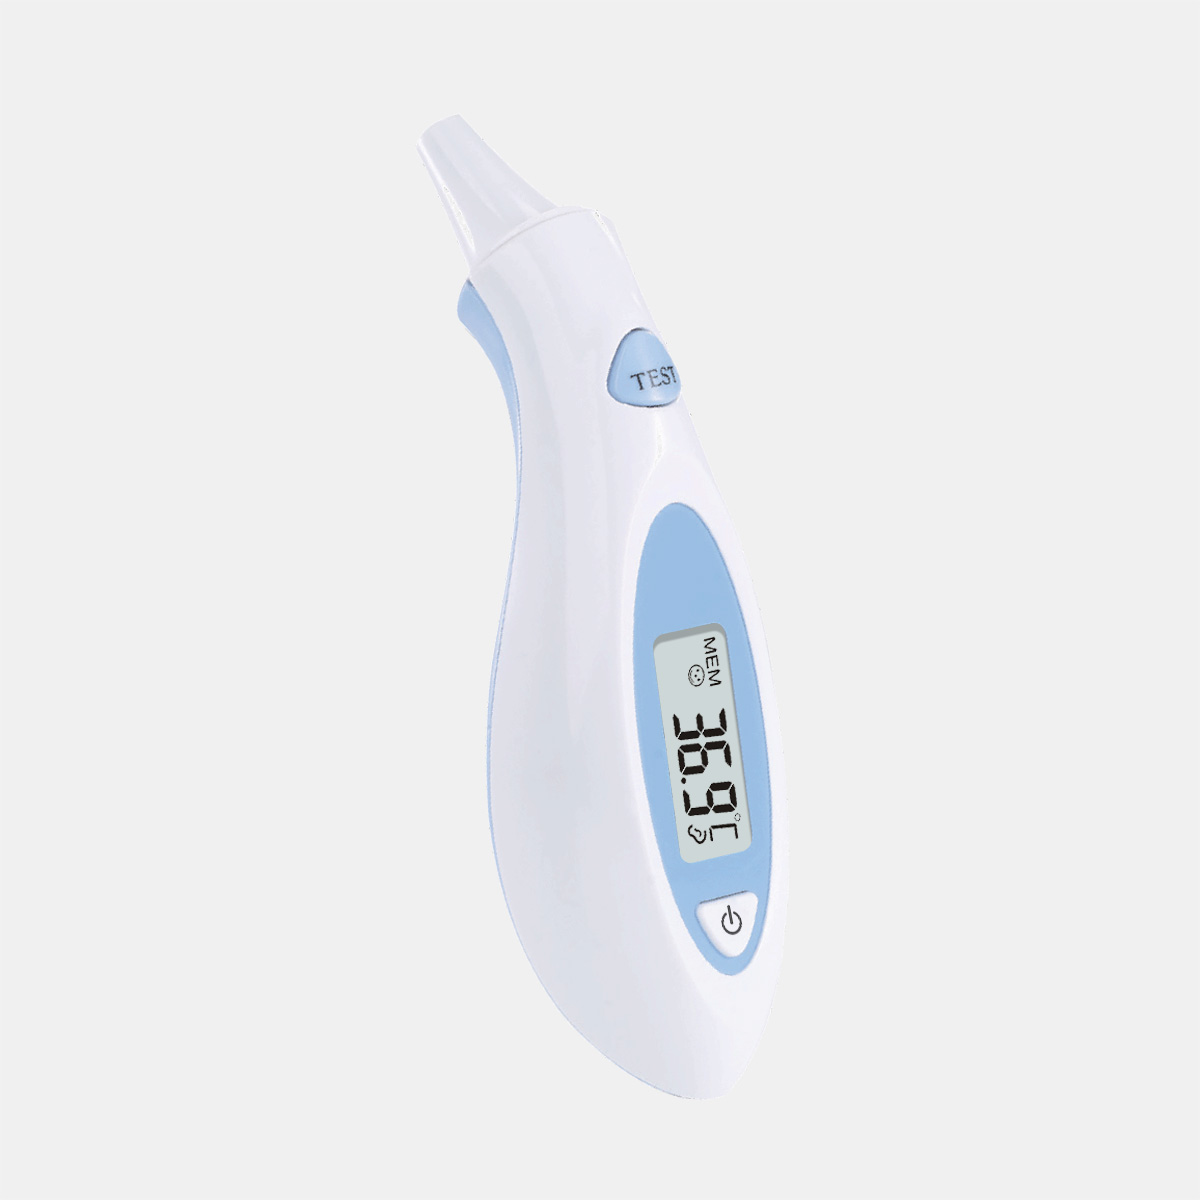 Sejoy Home ah Naute Infrared Fever Thermometer CE MDR Approval atan Basic Ear Thermometer hmang rawh